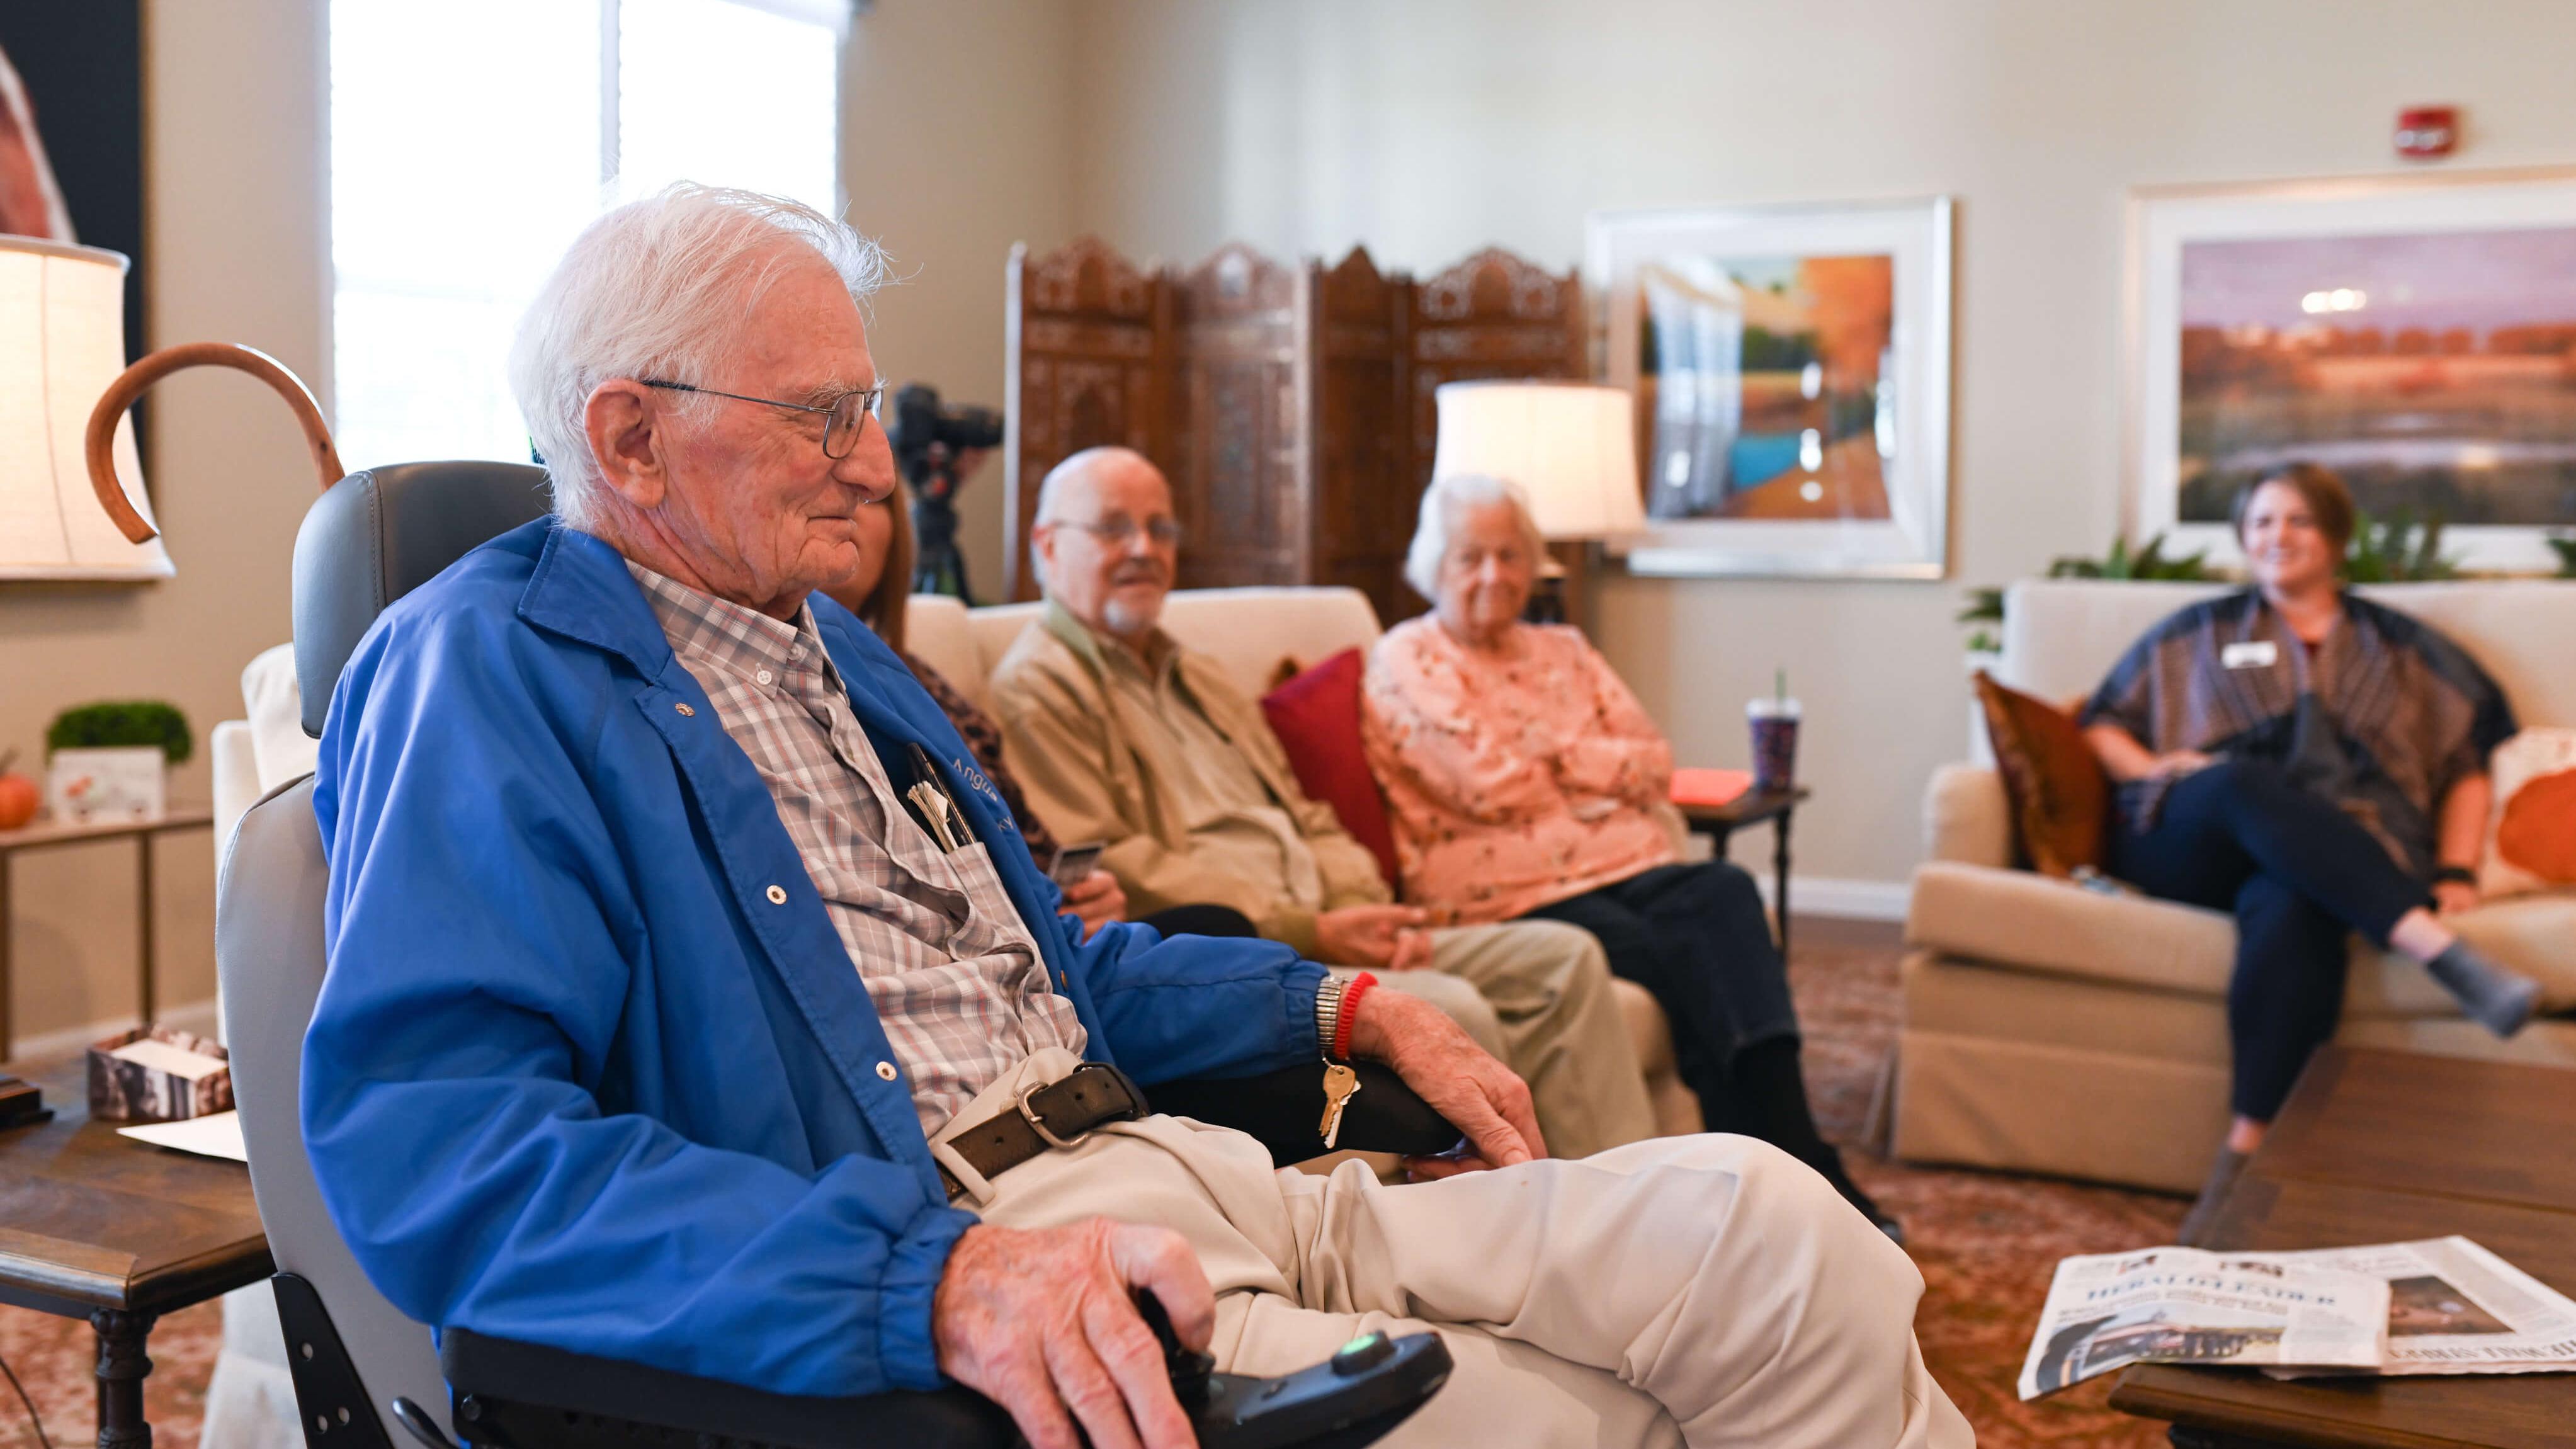 group of residents sitting in common area talking